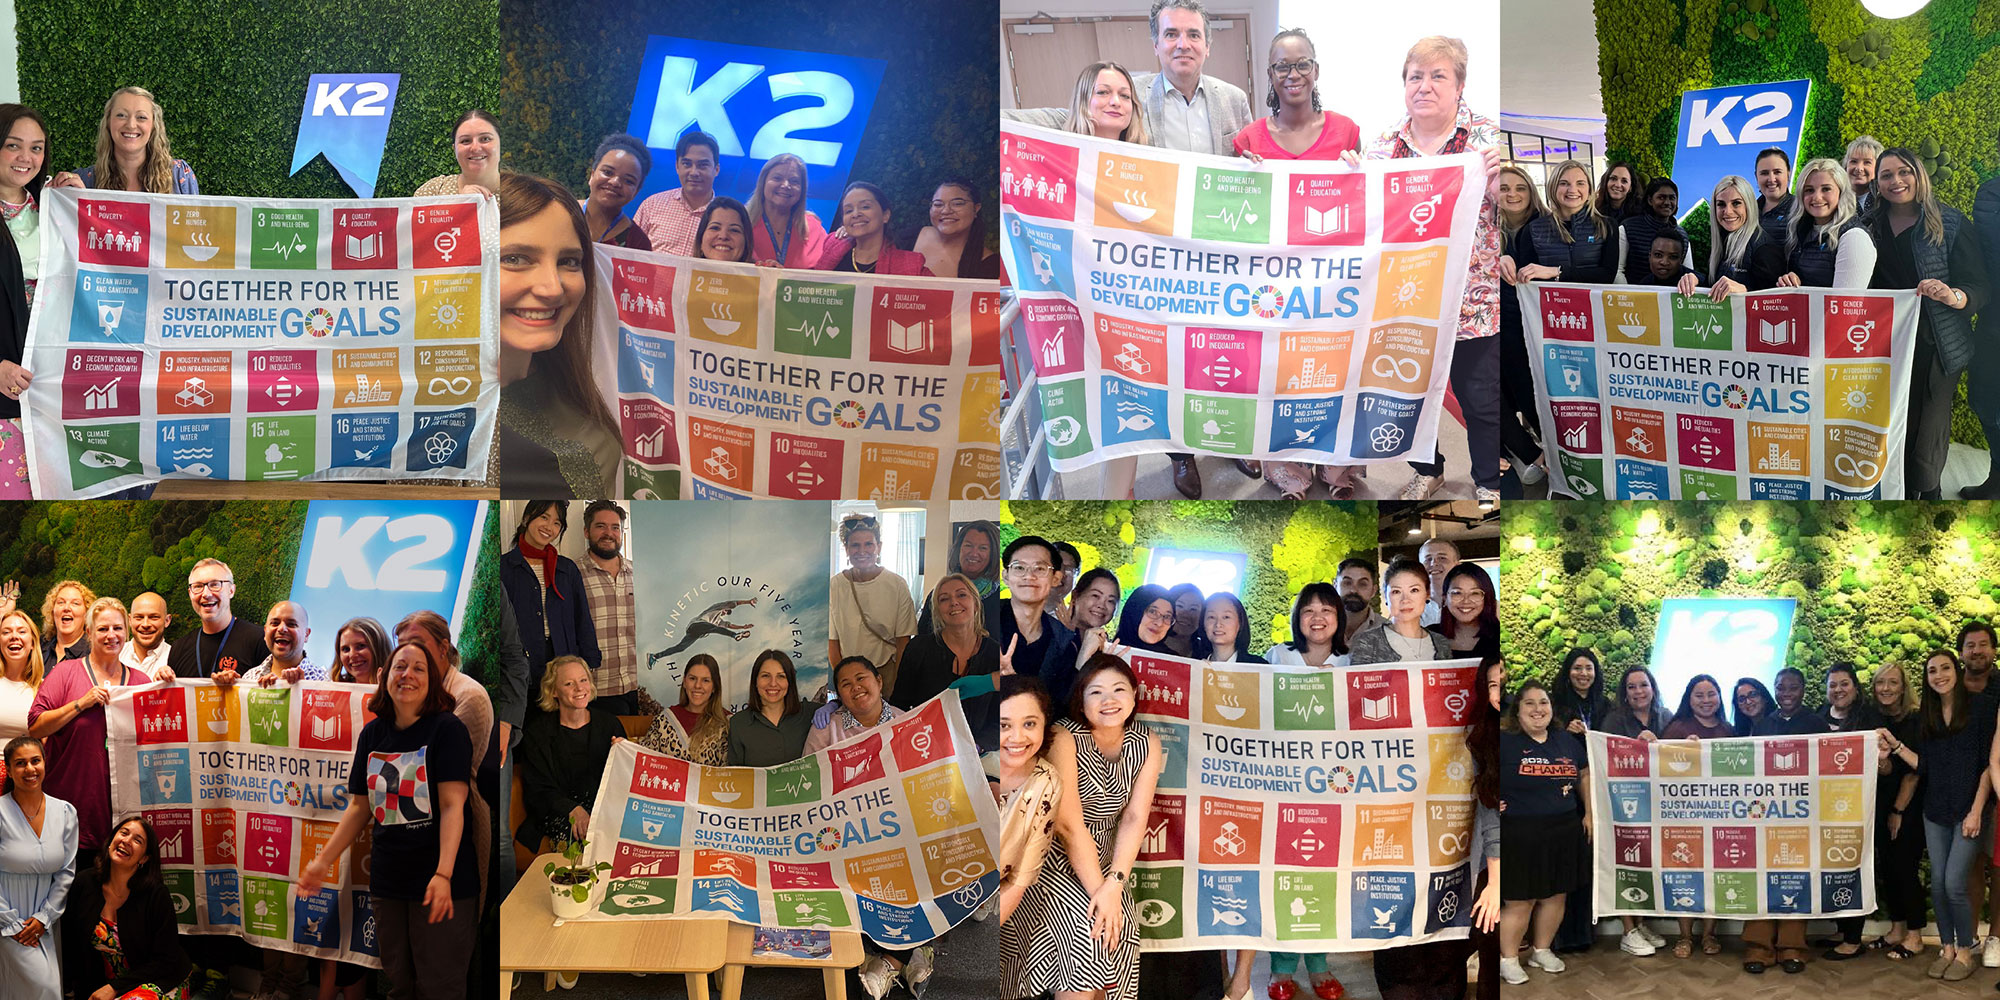 Flying the flag for the UN Sustainable Development Goals